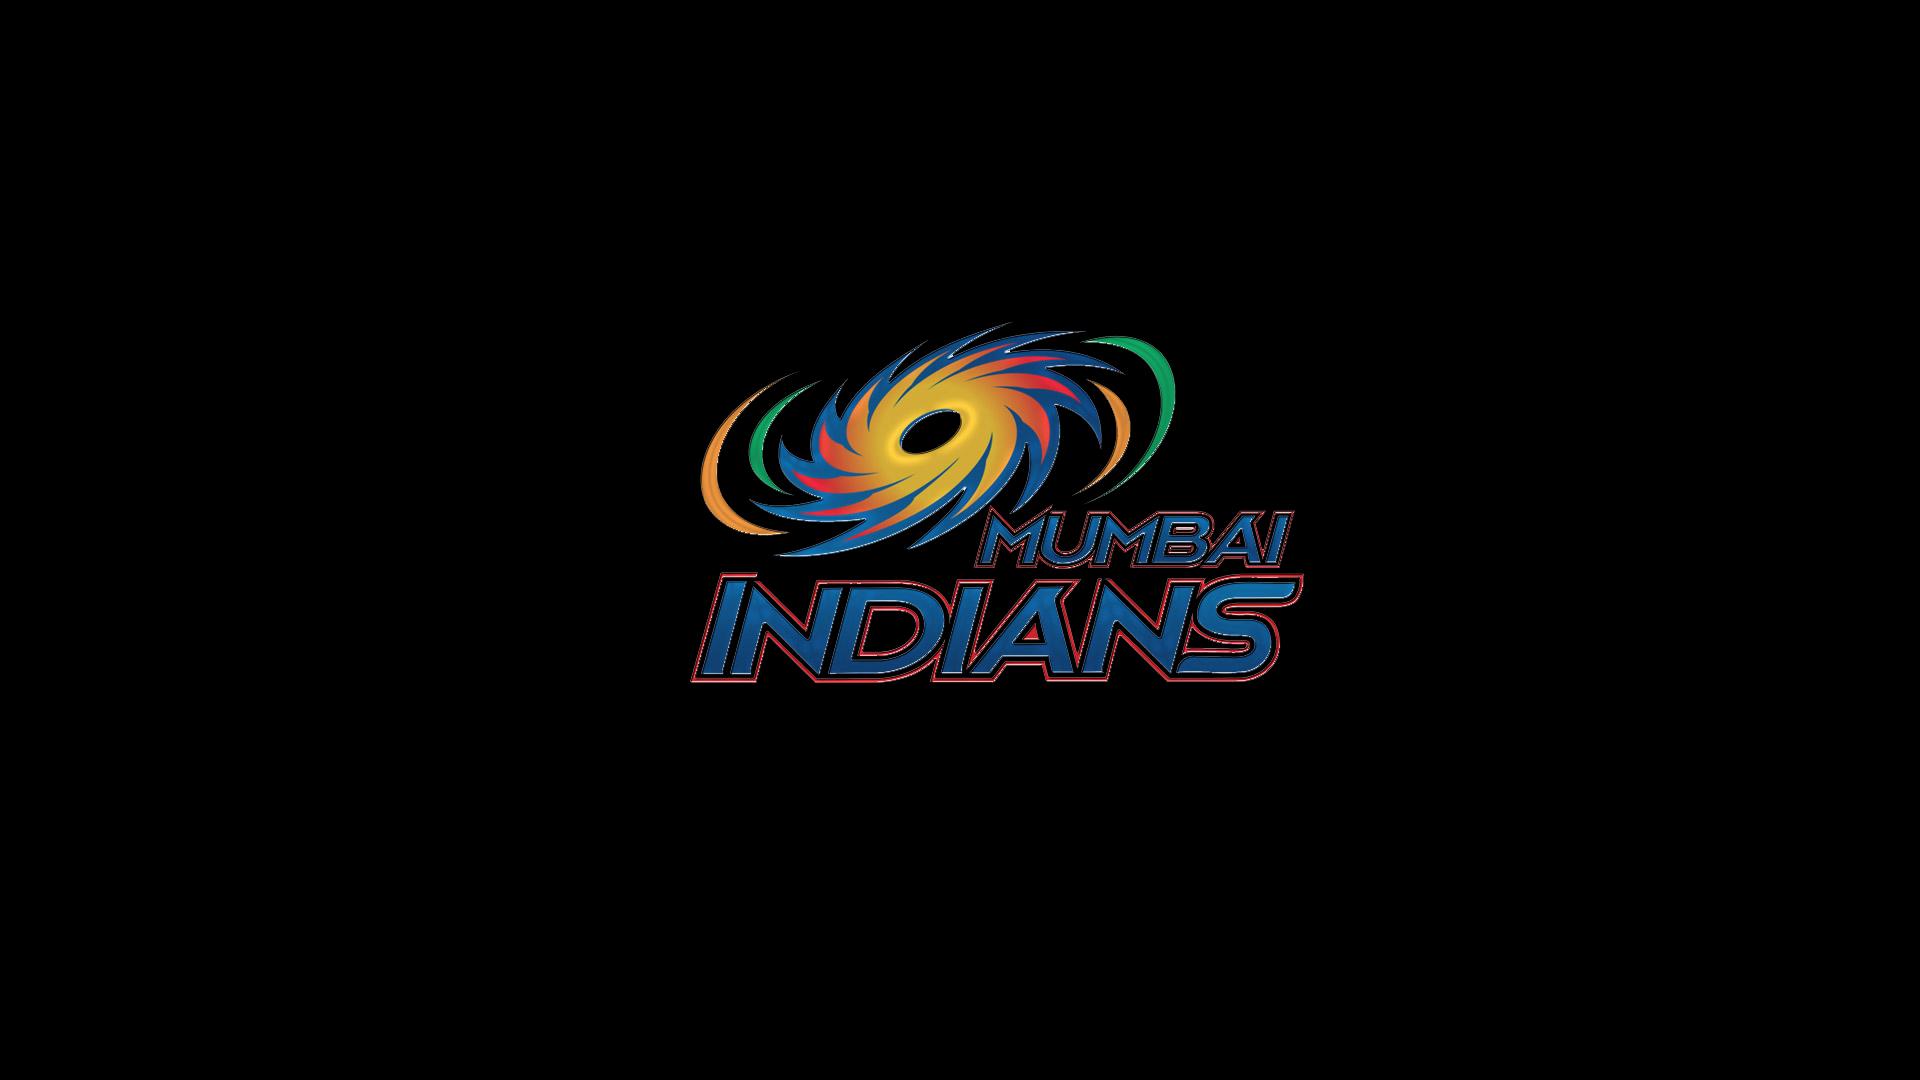 Mumbai Indians Spend Rs. 11.1 Crore to Acquire 6 New Players- Fincash-donghotantheky.vn